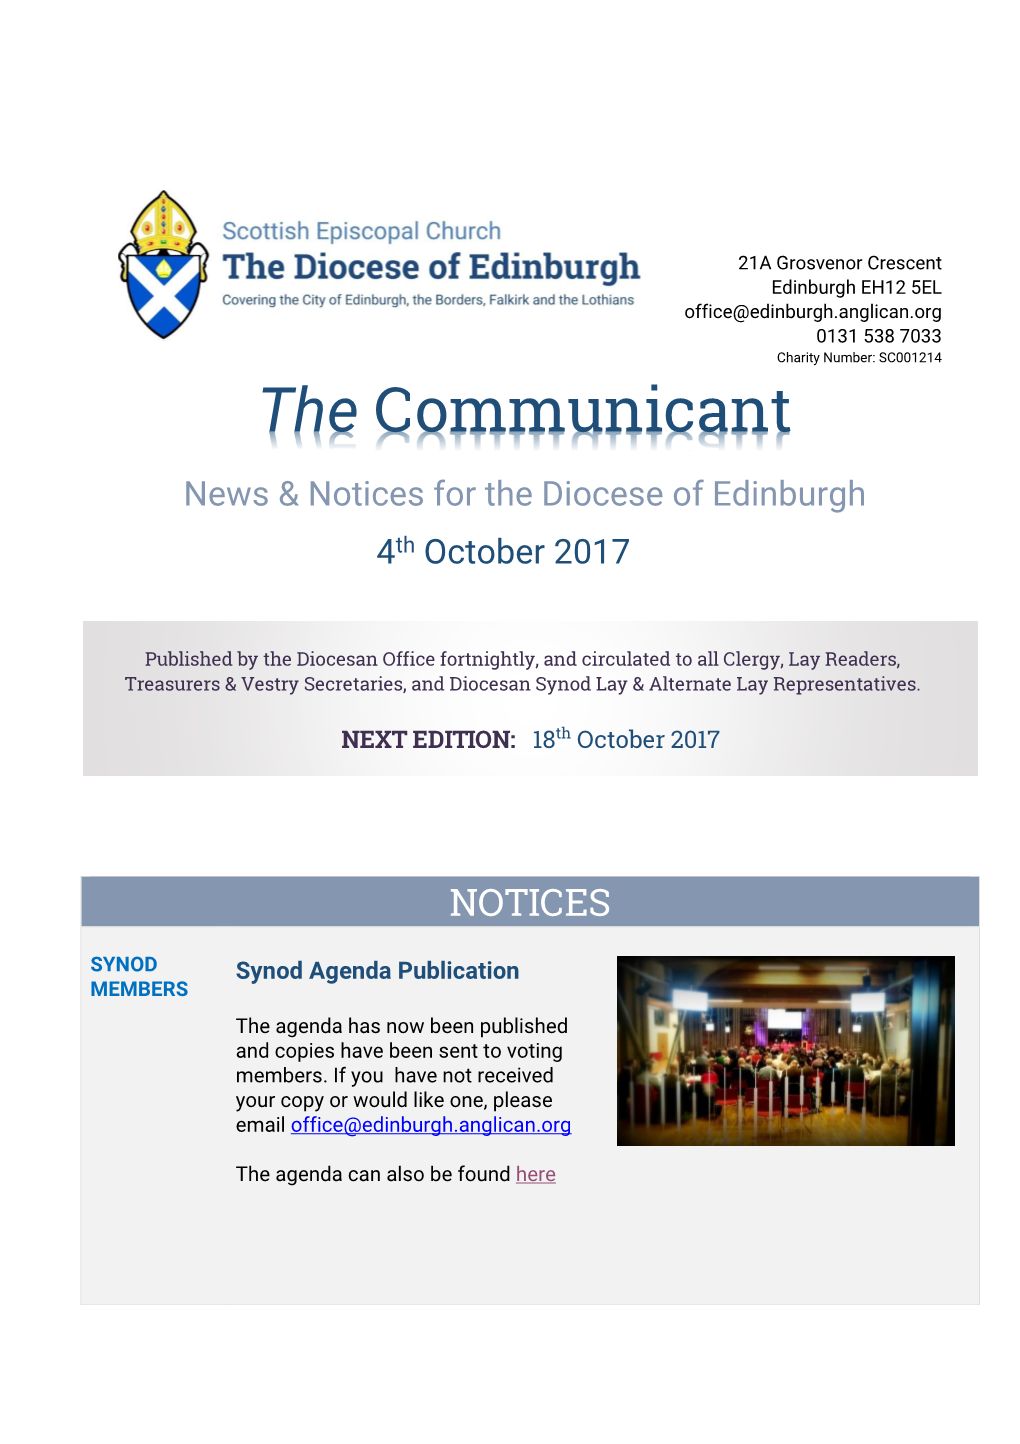 The Communicant News & Notices for the Diocese of Edinburgh 4Th October 2017